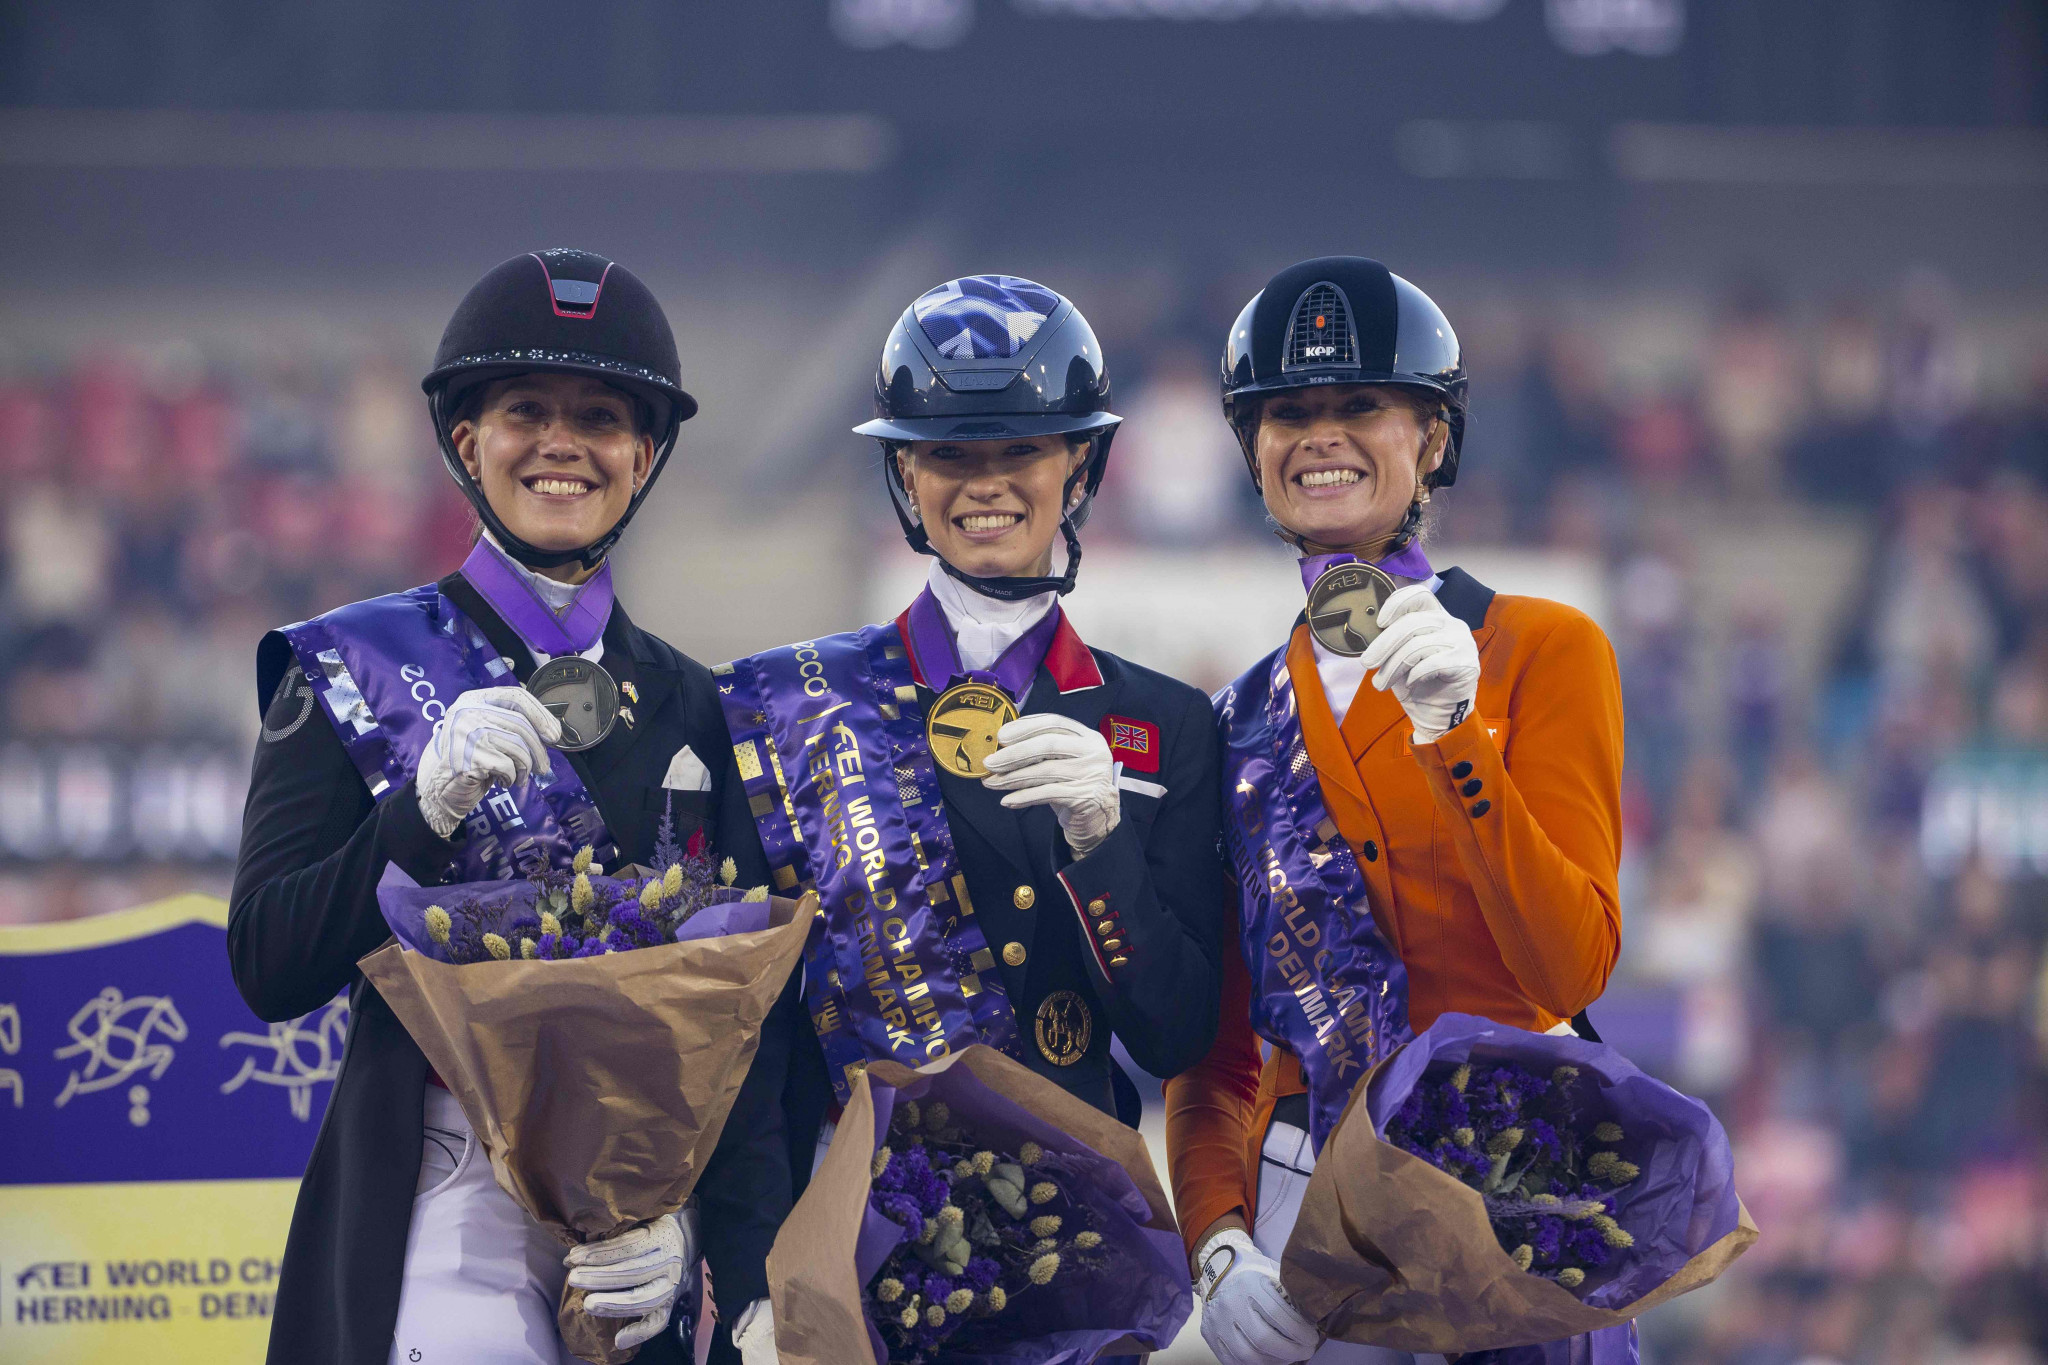 Charlotte Fry and Glamourdale won gold in the Grand Prix special at the FEI World Championships in Herning ©FEI/Leanjo de Koster